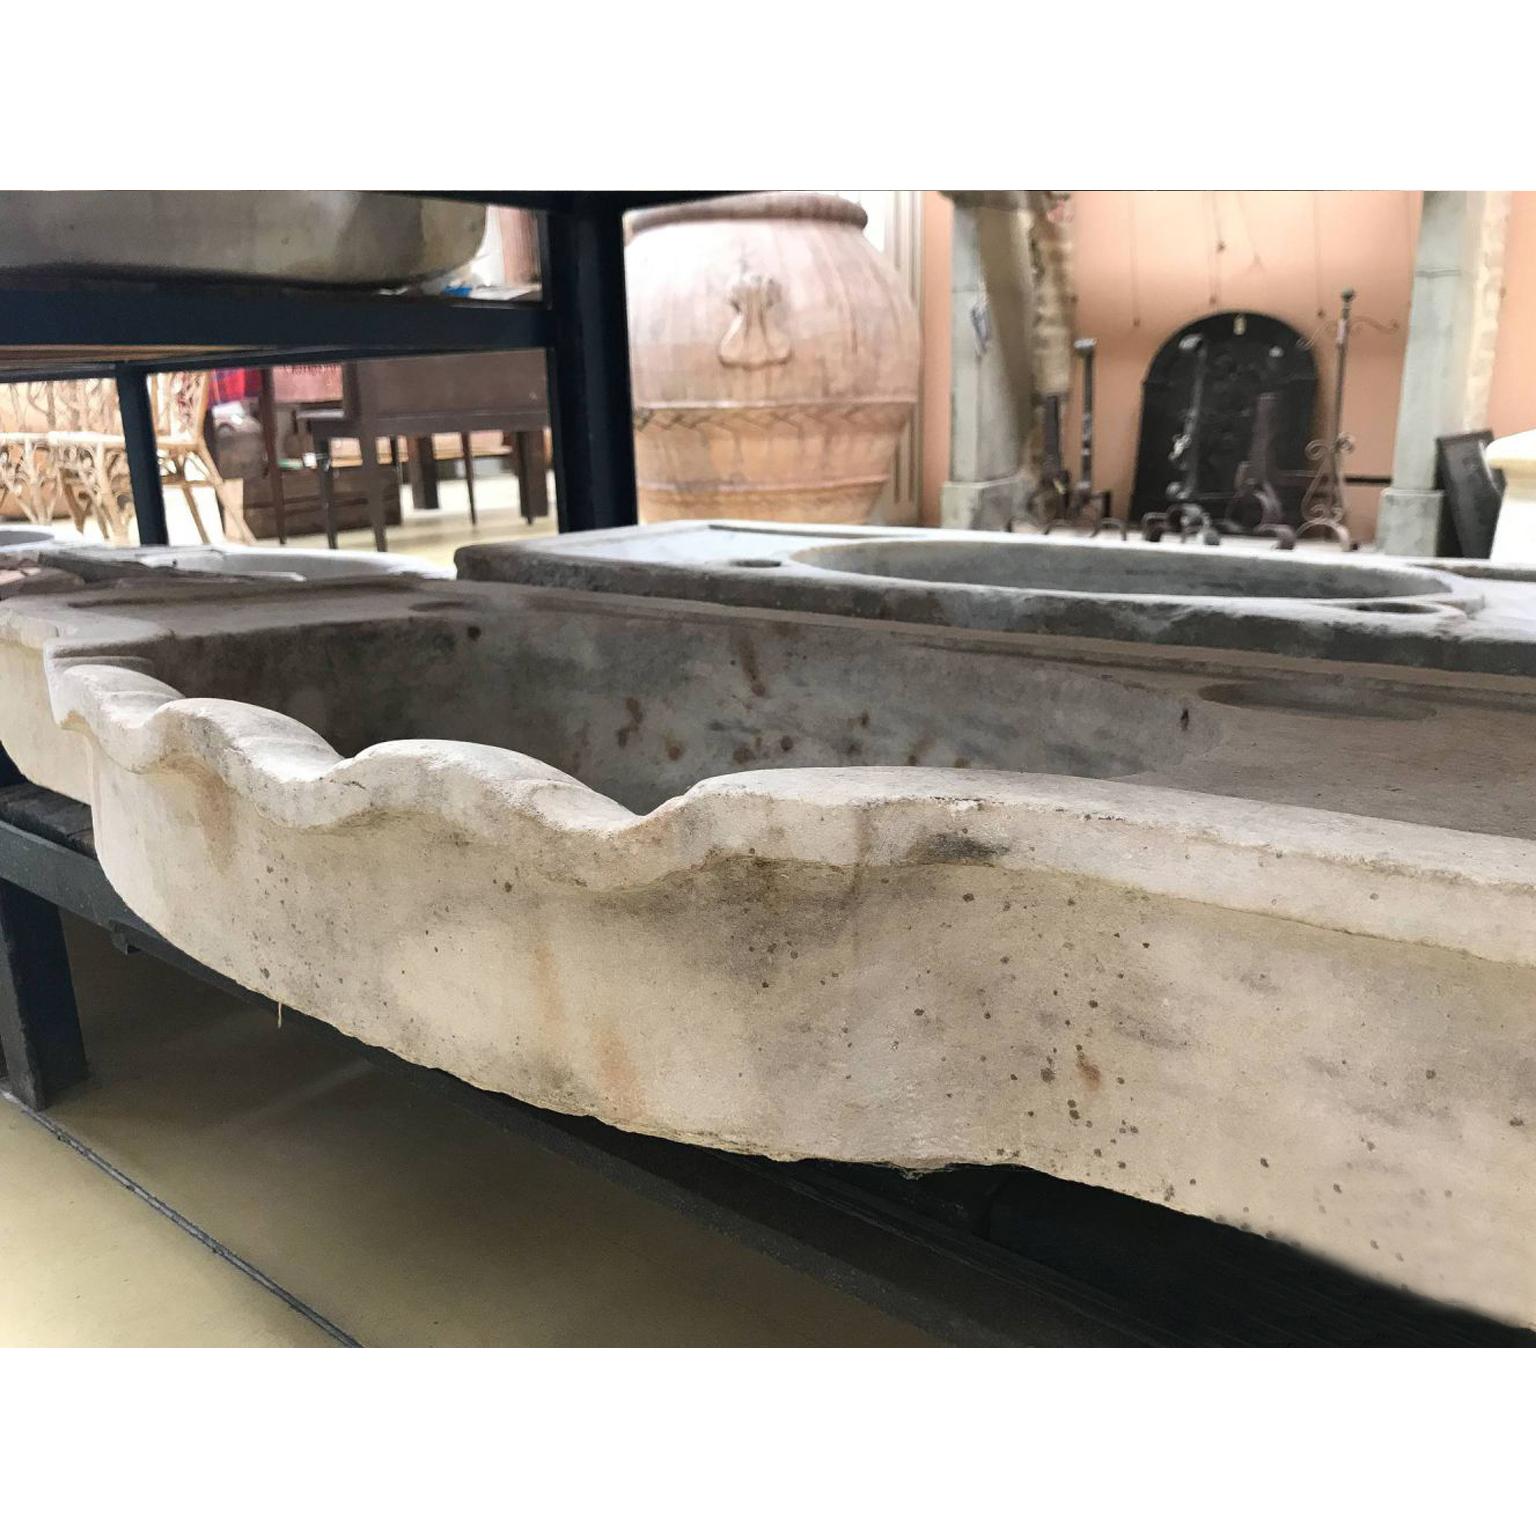 This timeless Italian classical sink is cut from one single block of white marble, these designs have not changed since Greek and Roman times, it carries superb artistic merit easily fitting in with old and new buildings.
It also makes an excellent